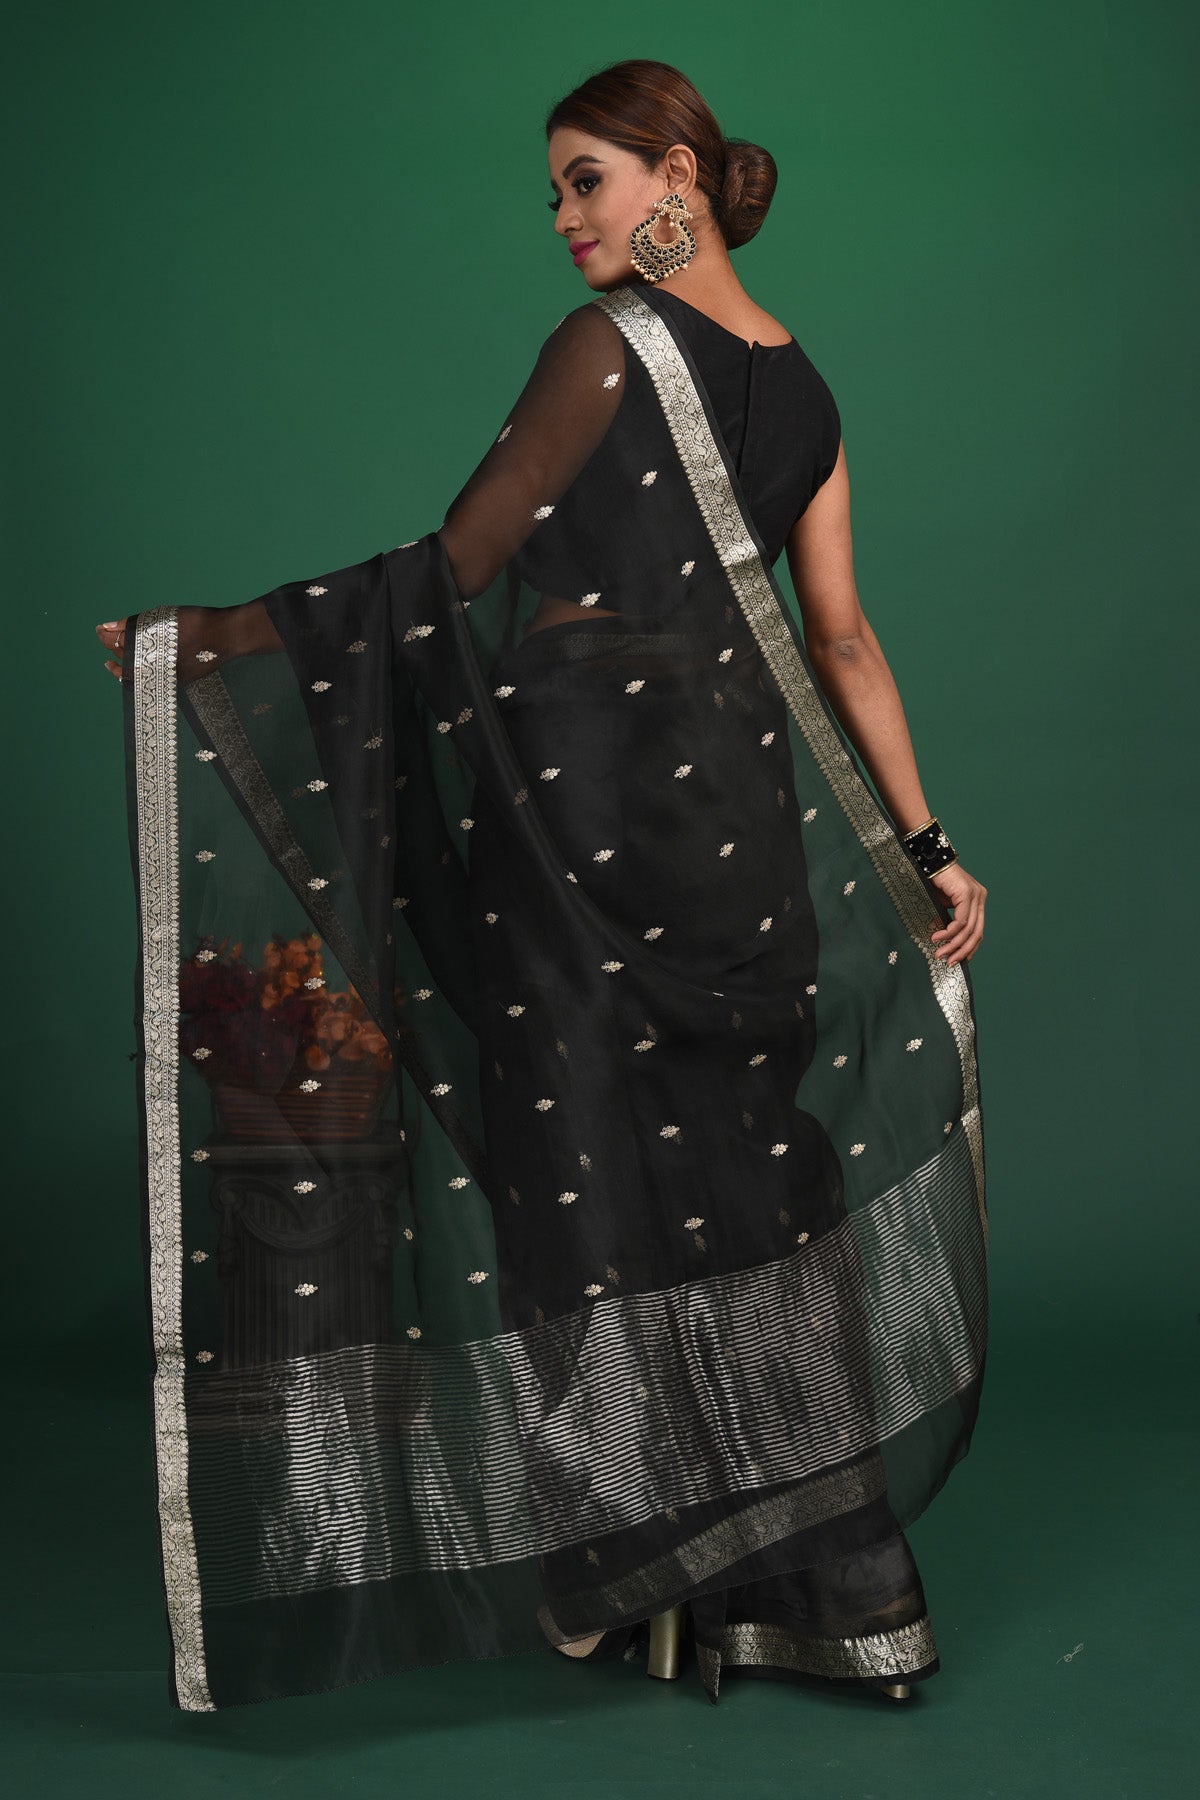 Buy this elegant black soft organza designer saree with silver zari work on heavy border online in USA. Organza silk fabric is a type of silk cloth that is crisp, translucent, and extremely light in weight. It is used to make organza silk saree, drapes, and other decorative pieces. Add this designer sari to your collection from Pure Elegance Indian fashion store in USA.-Back view with open pallu.